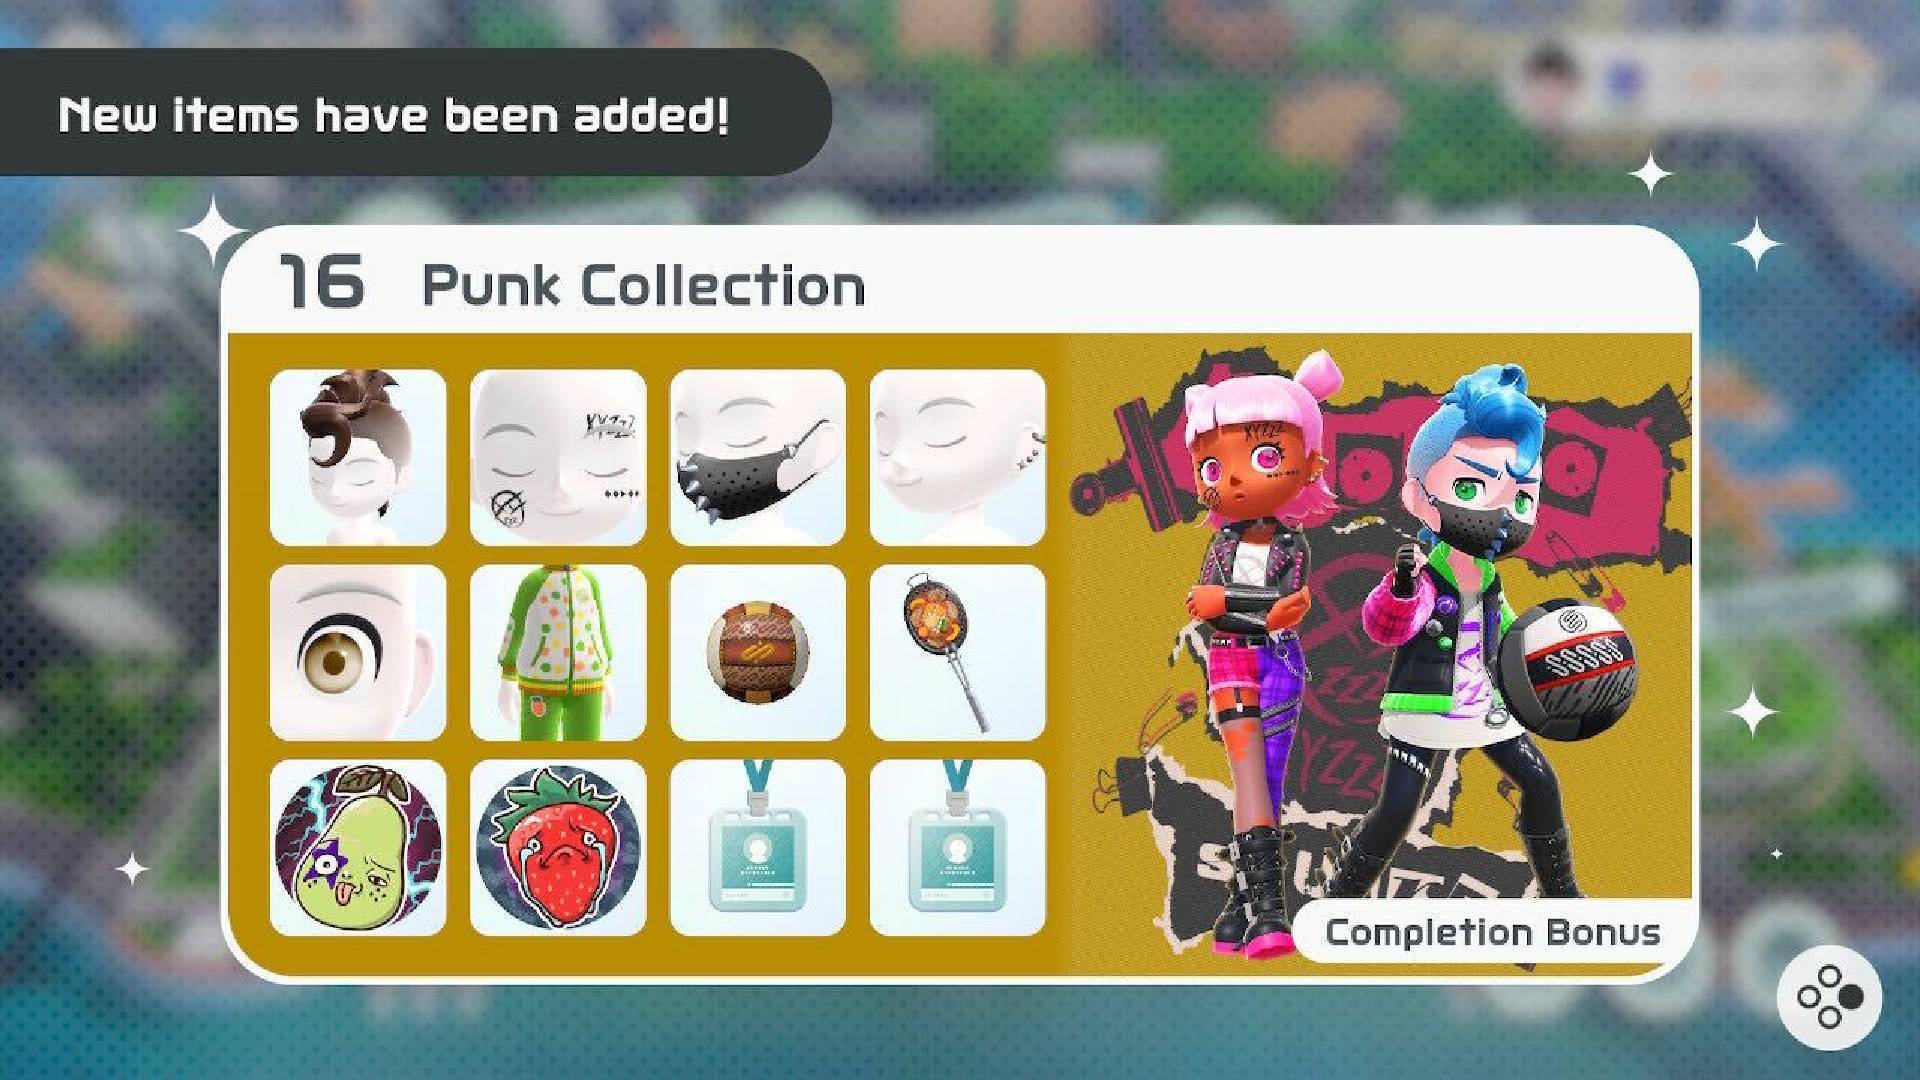 Nintendo Switch Sports cosmetics: a menu shows a variety of clothing options, based on the theme of punk